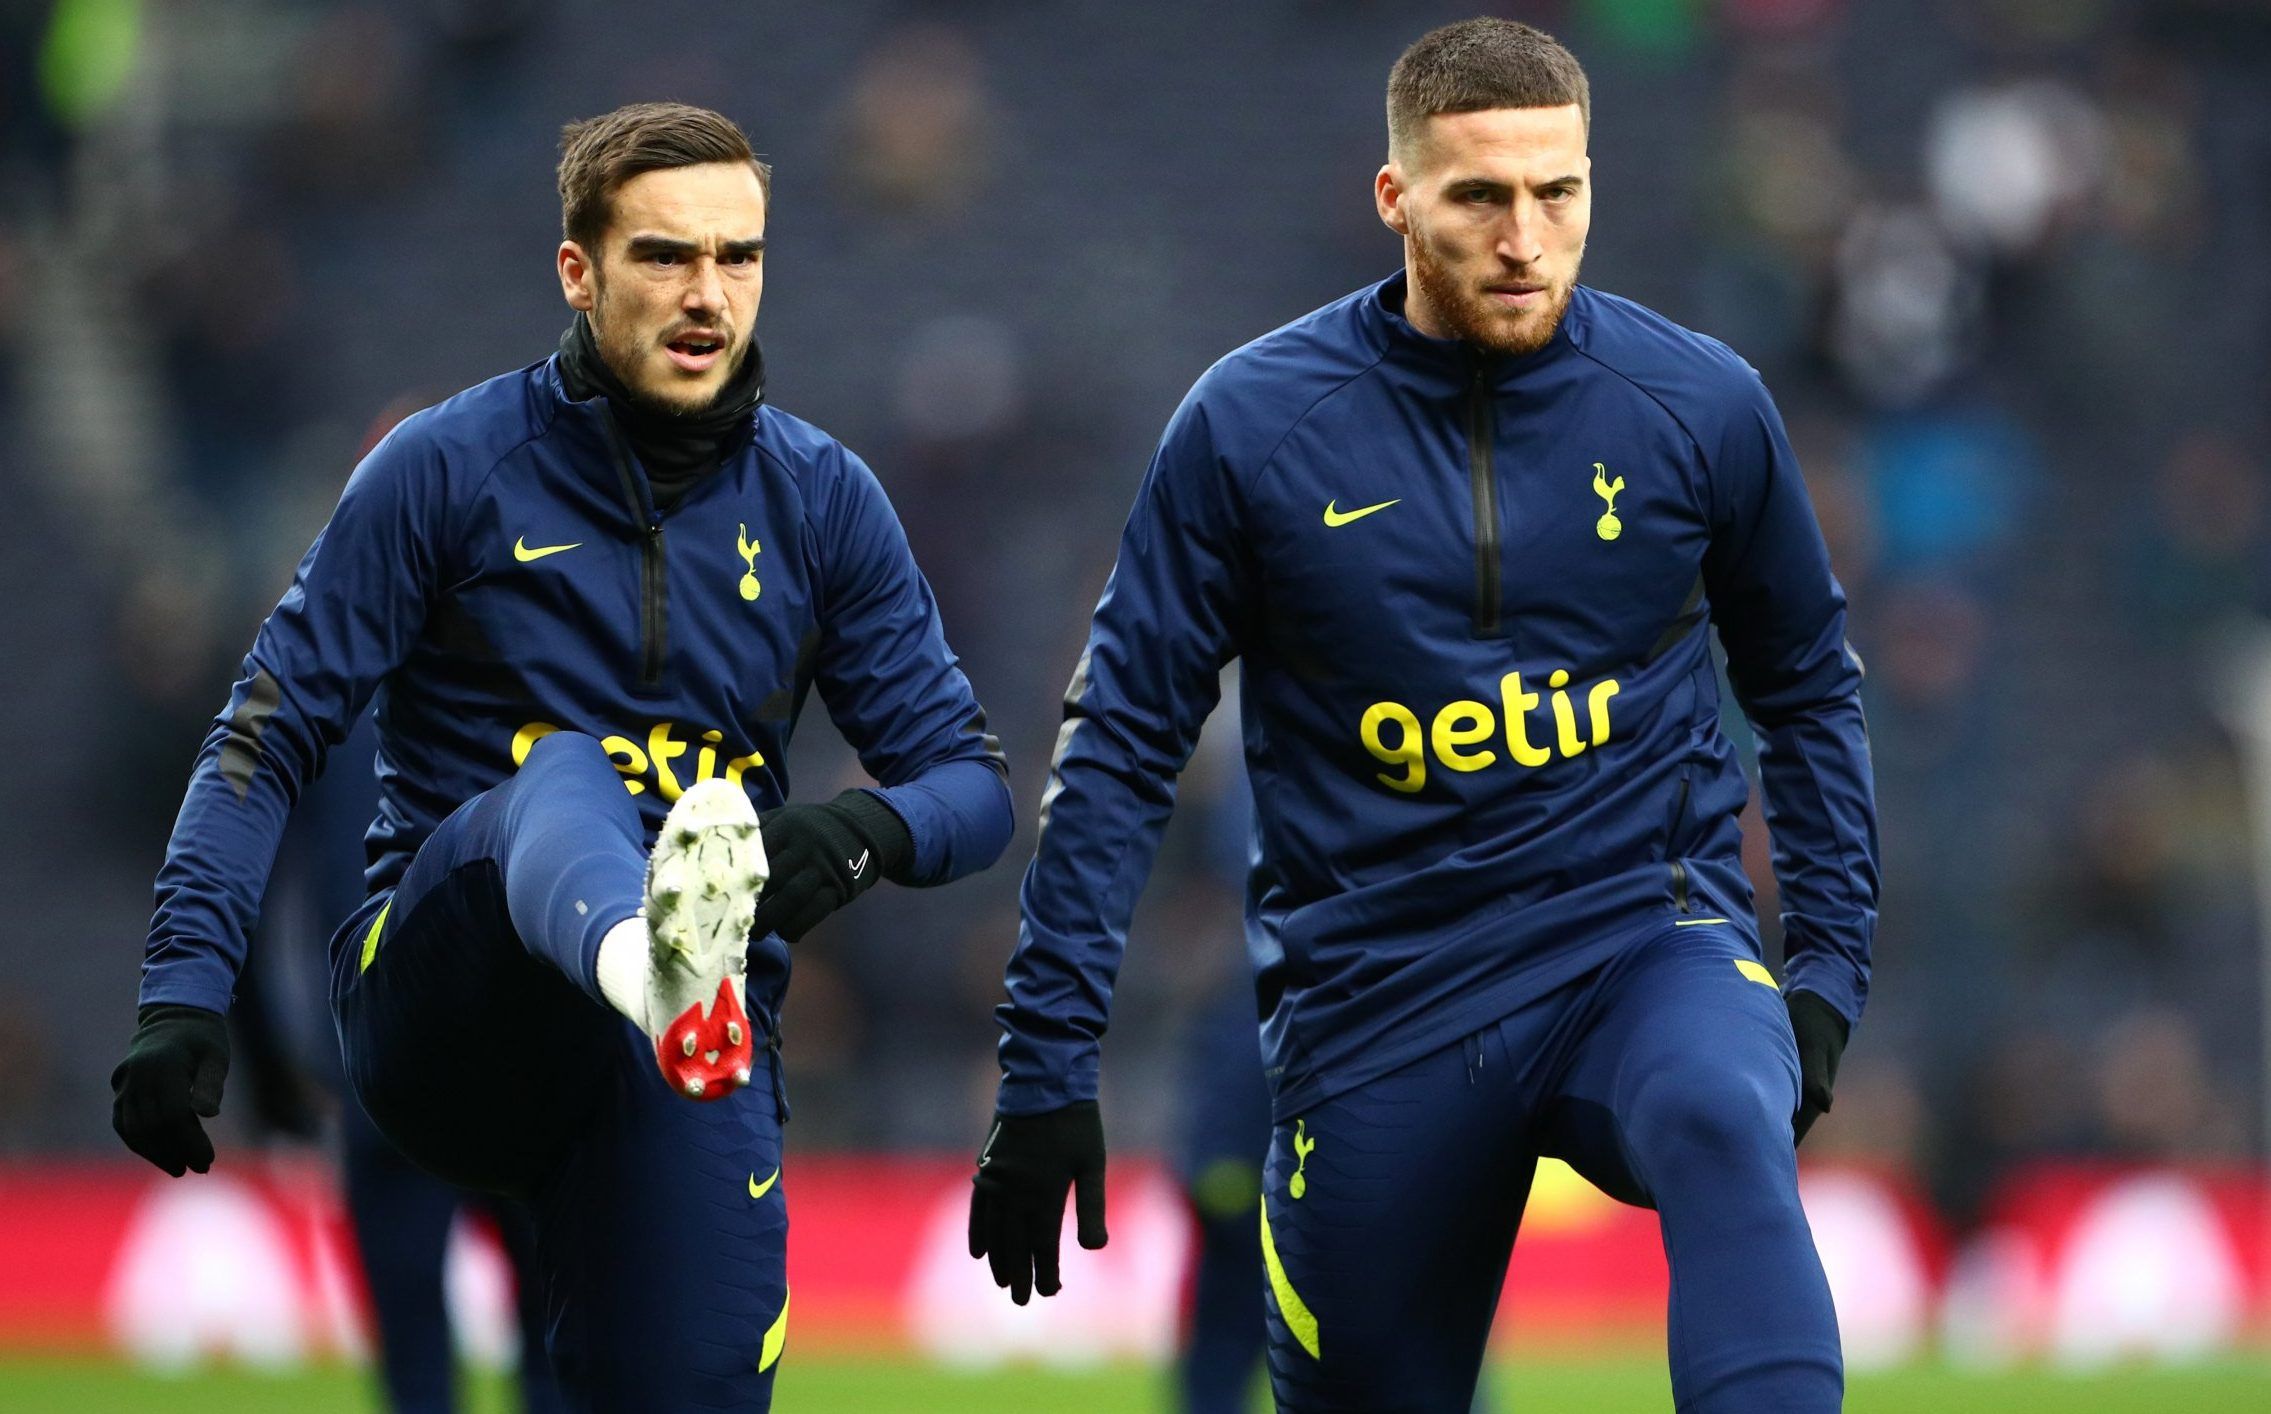 Spurs stars Matt Doherty and Harry Winks warm up before Norwich City clash